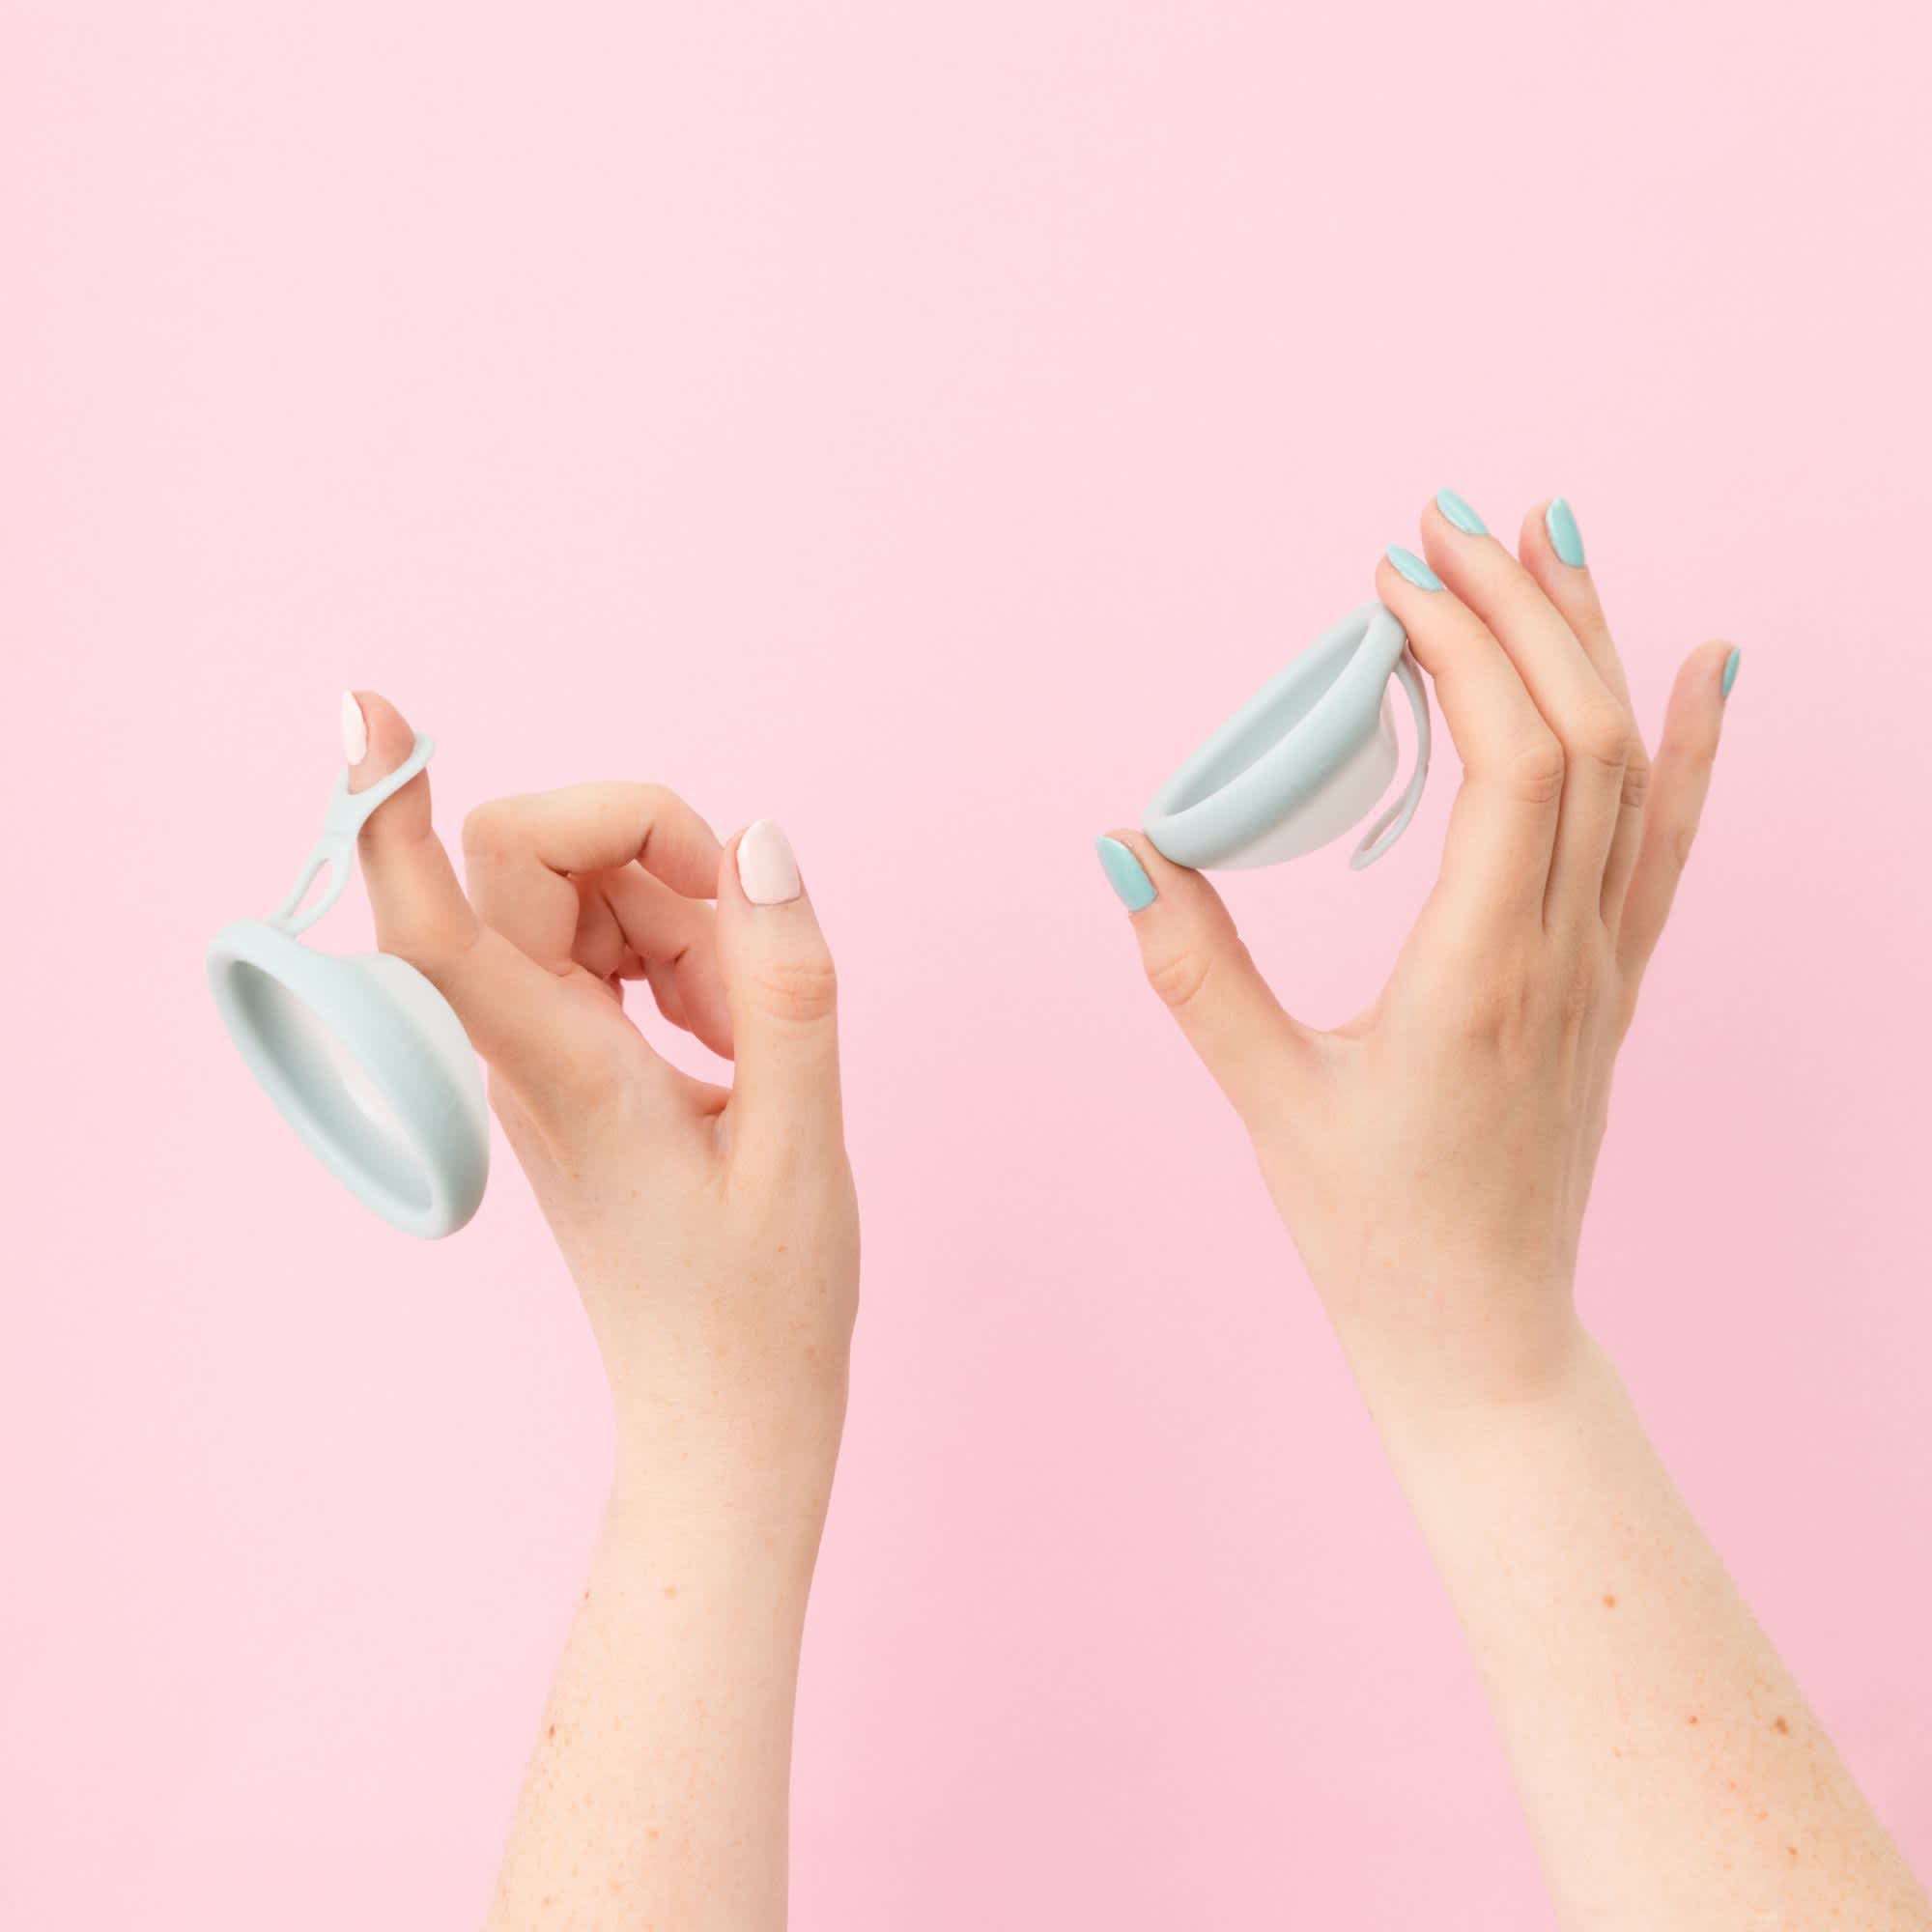 Hereâs What to Do If You Canât Wear a Menstrual Cup With Your IUD ...